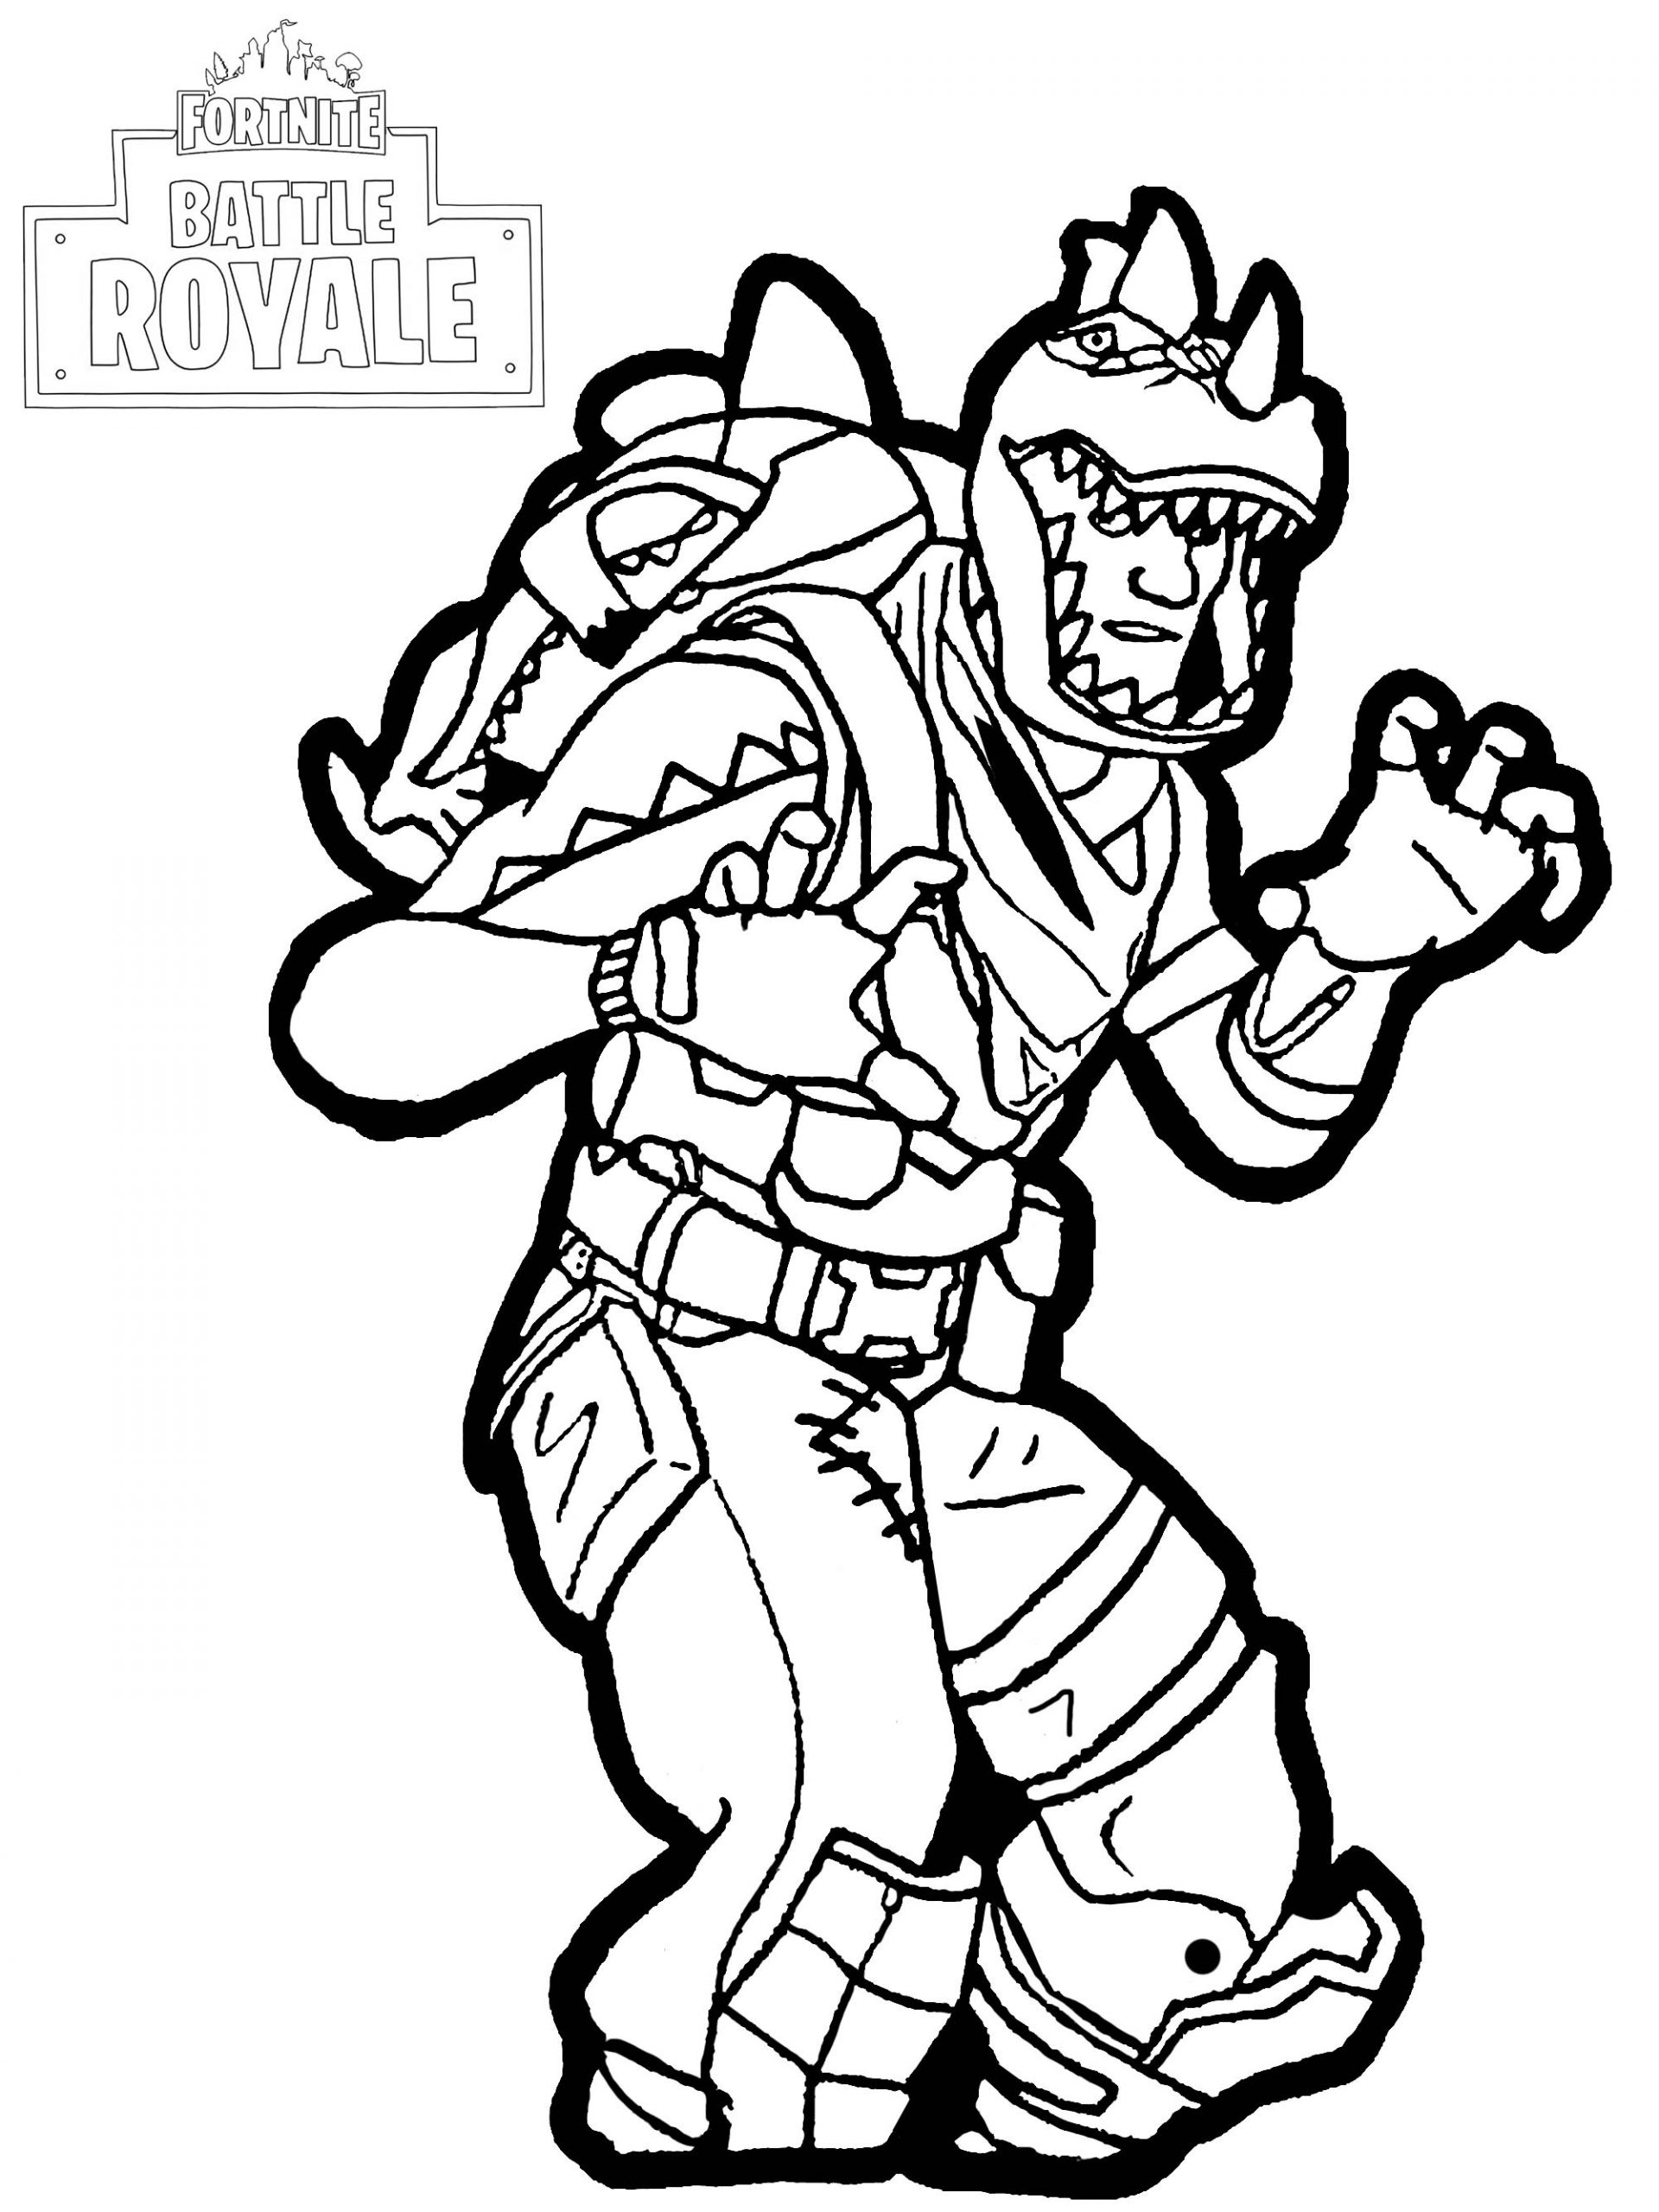 fortnite-season-x-coloring-page-free-printable-coloring-pages-for-kids